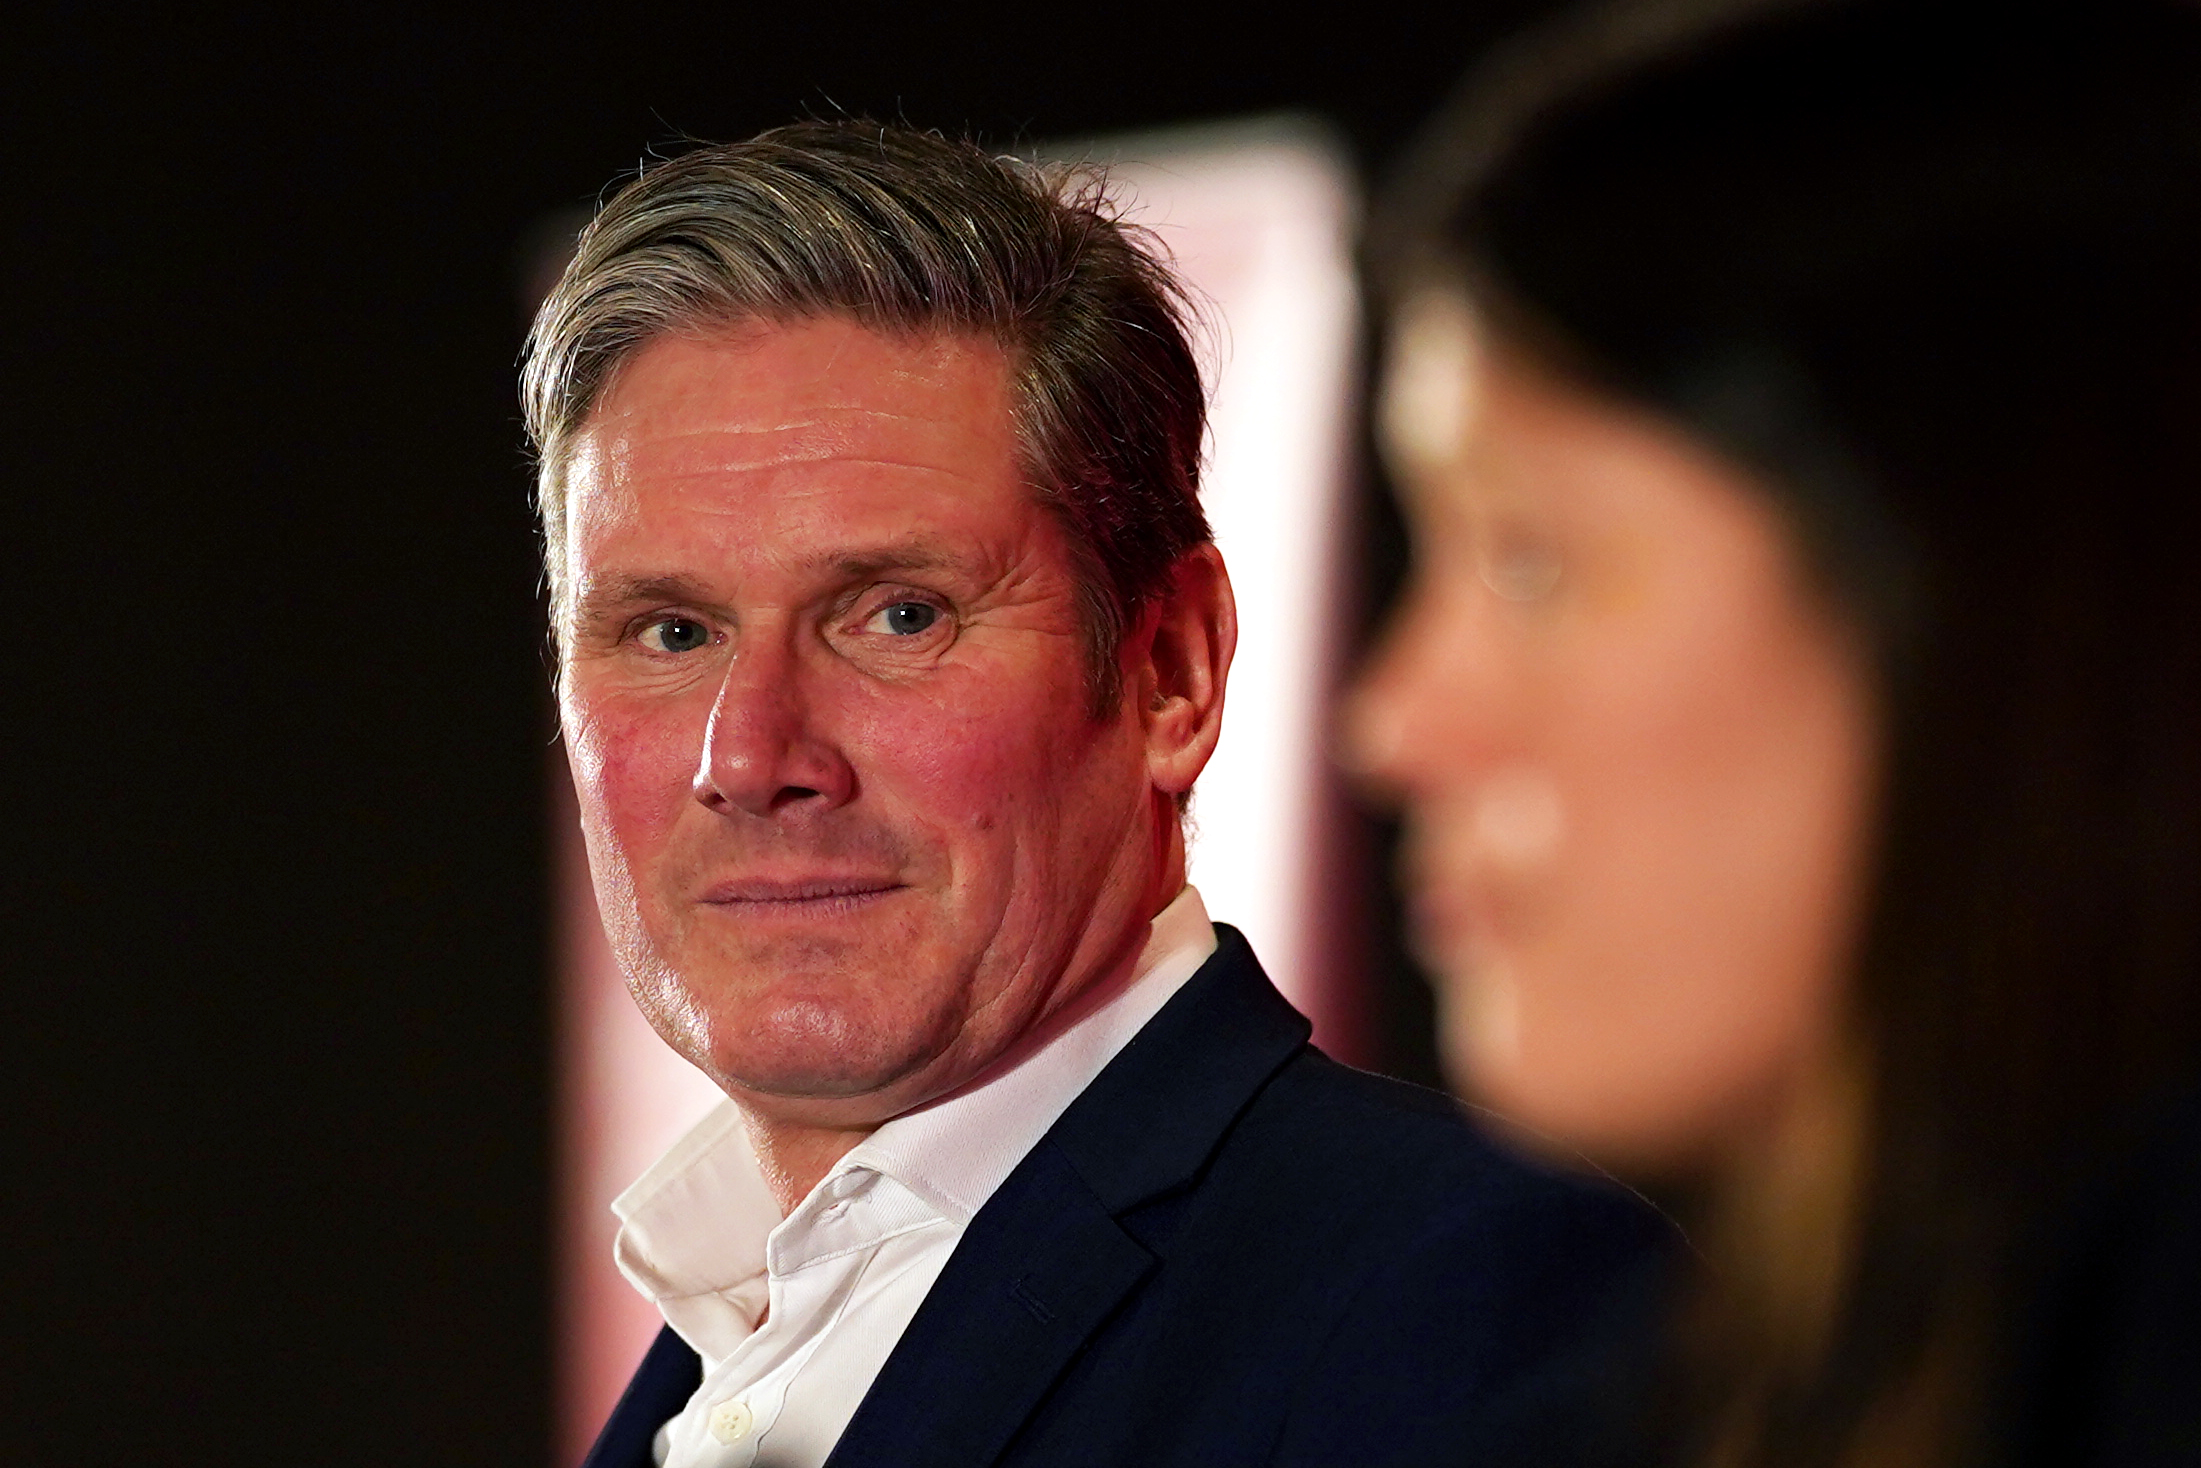 DURHAM, ENGLAND - FEBRUARY 23: Sir Keir Starmer, Shadow Secretary of State for Exiting the European Union looks on as Lisa Nandy, MP for Wigan addresses the audience during the Labour Party L